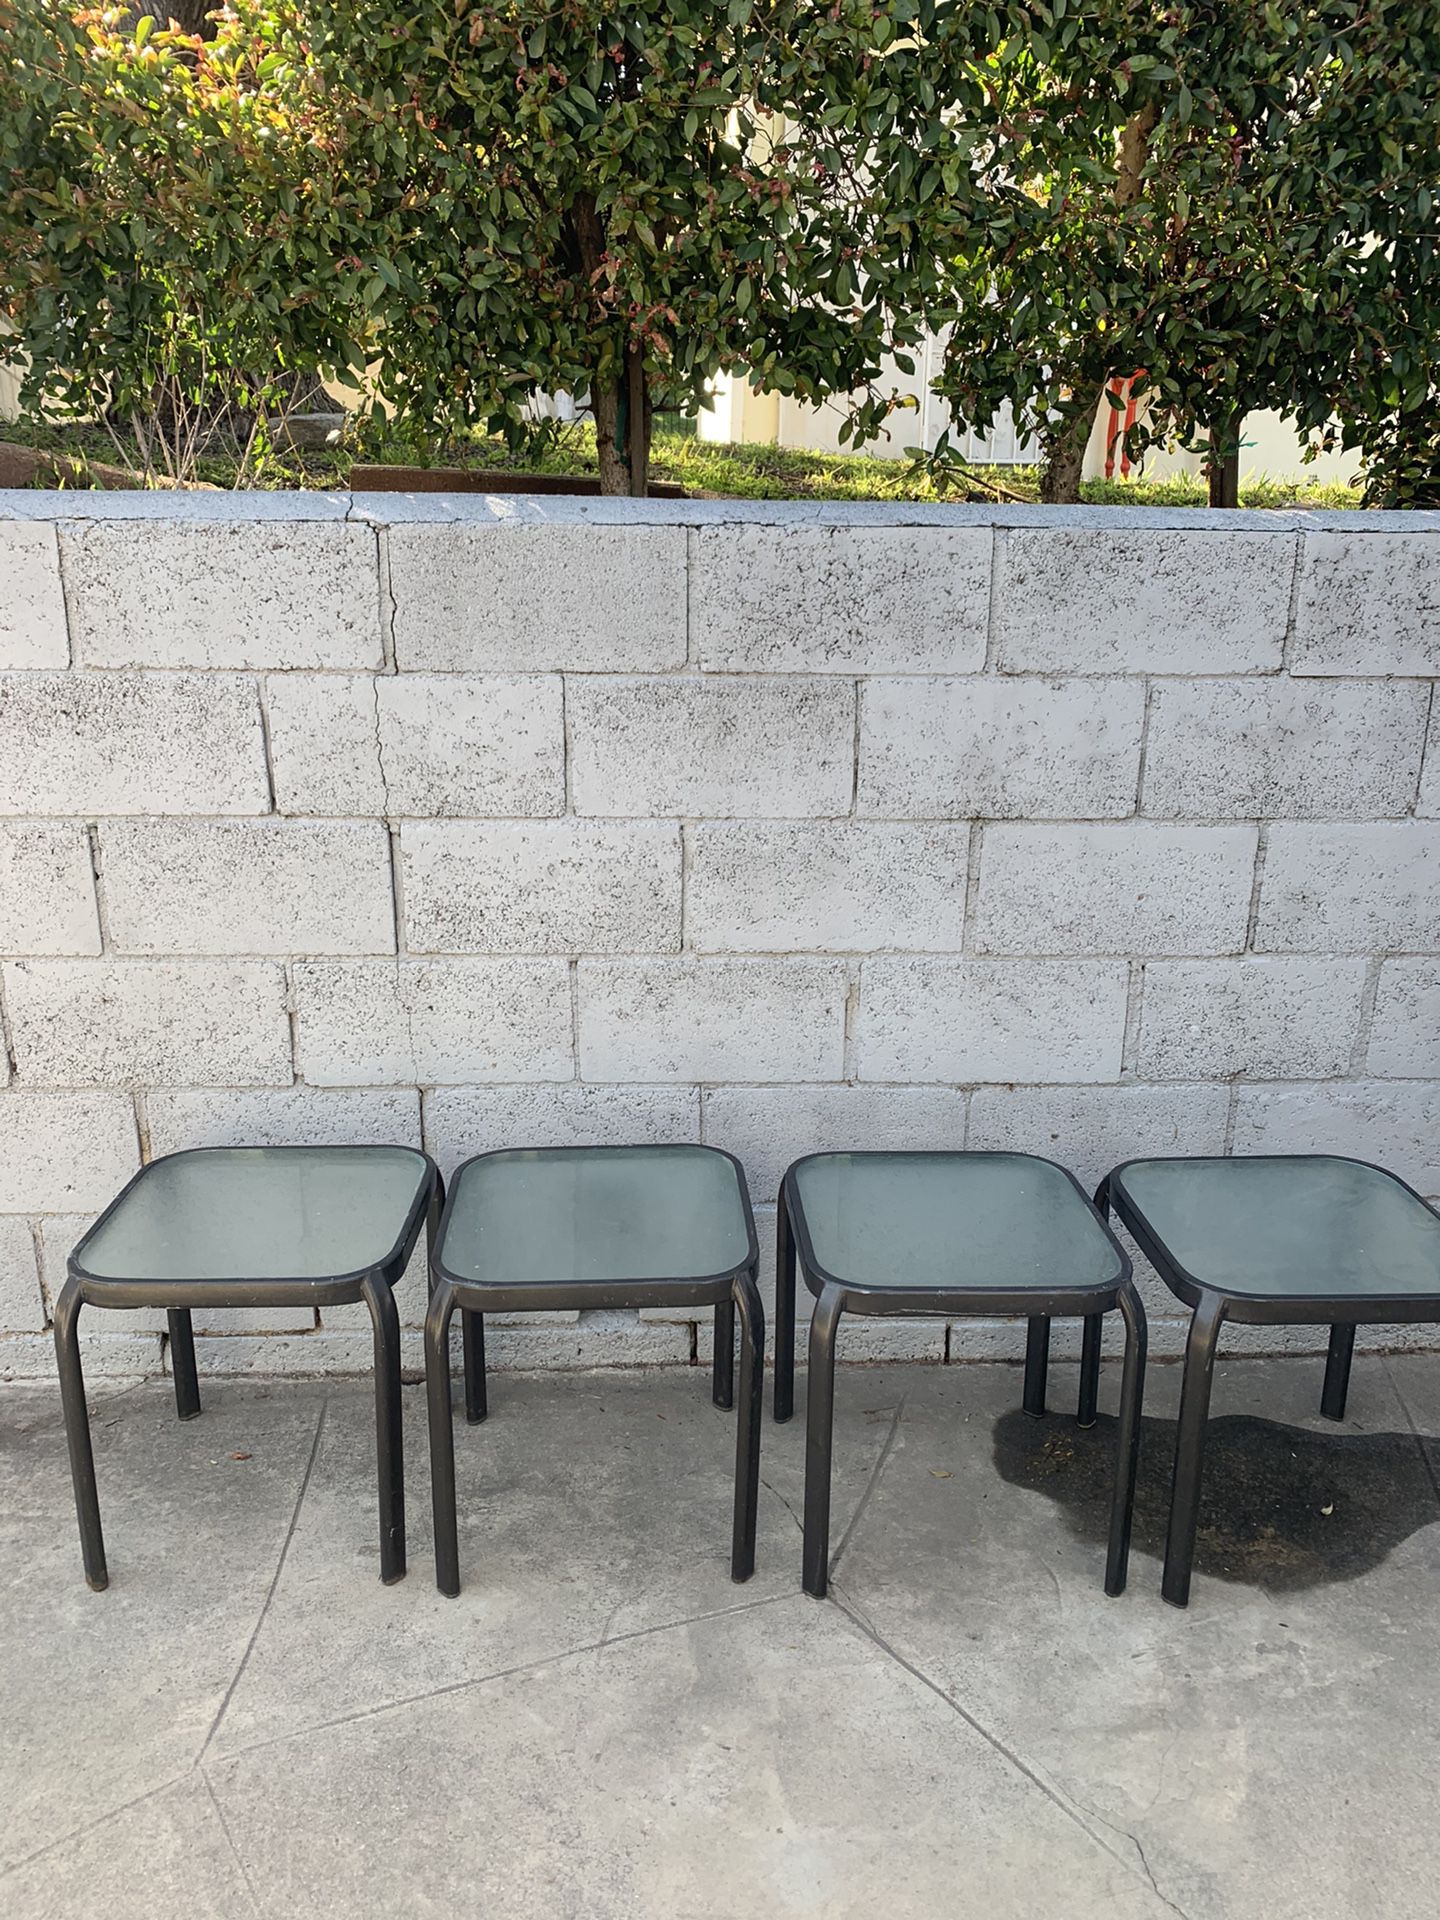 Patio side tables 4 for $15